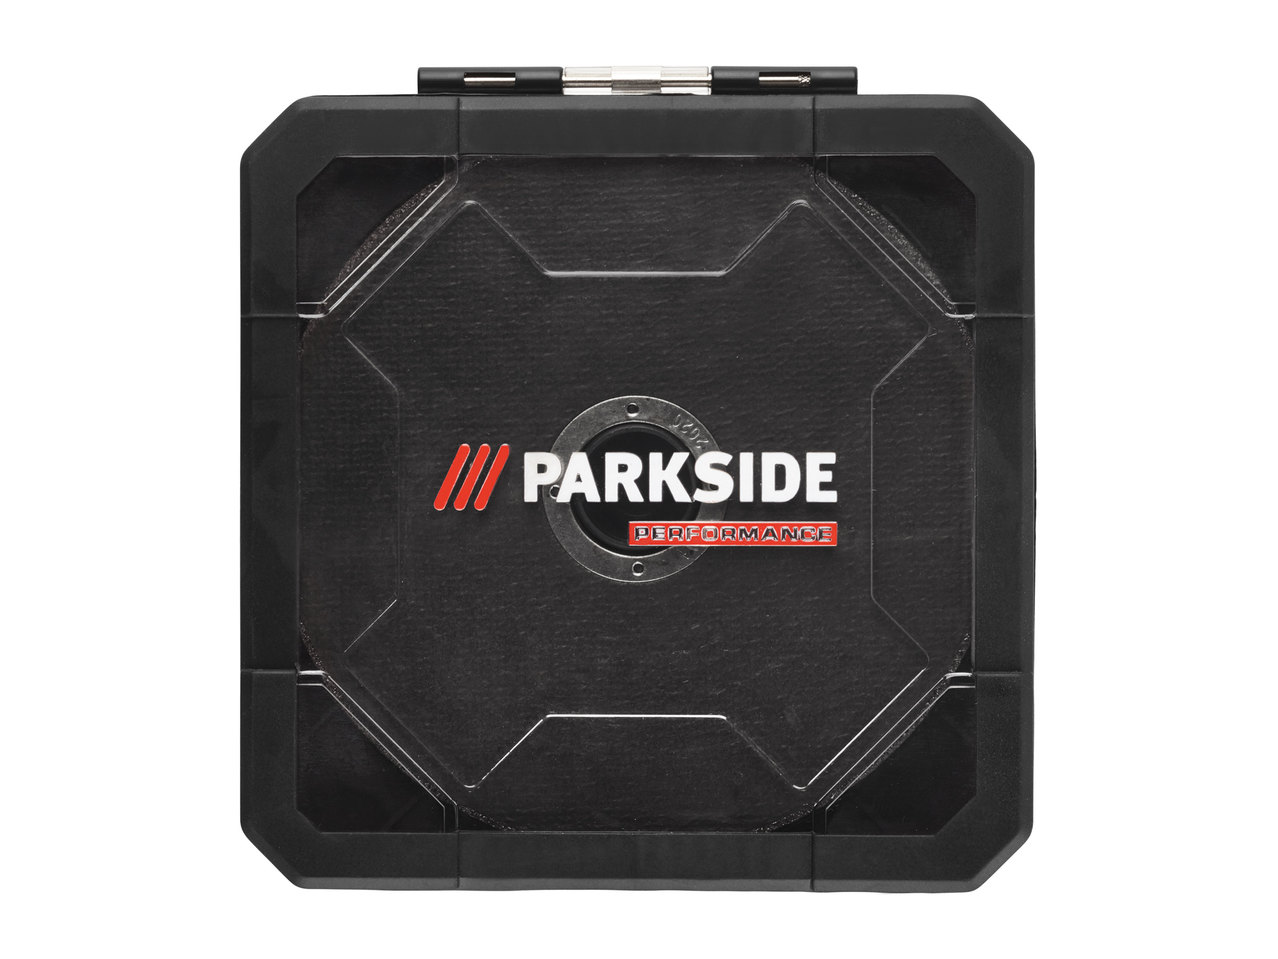 Parkside Cutting Disc1